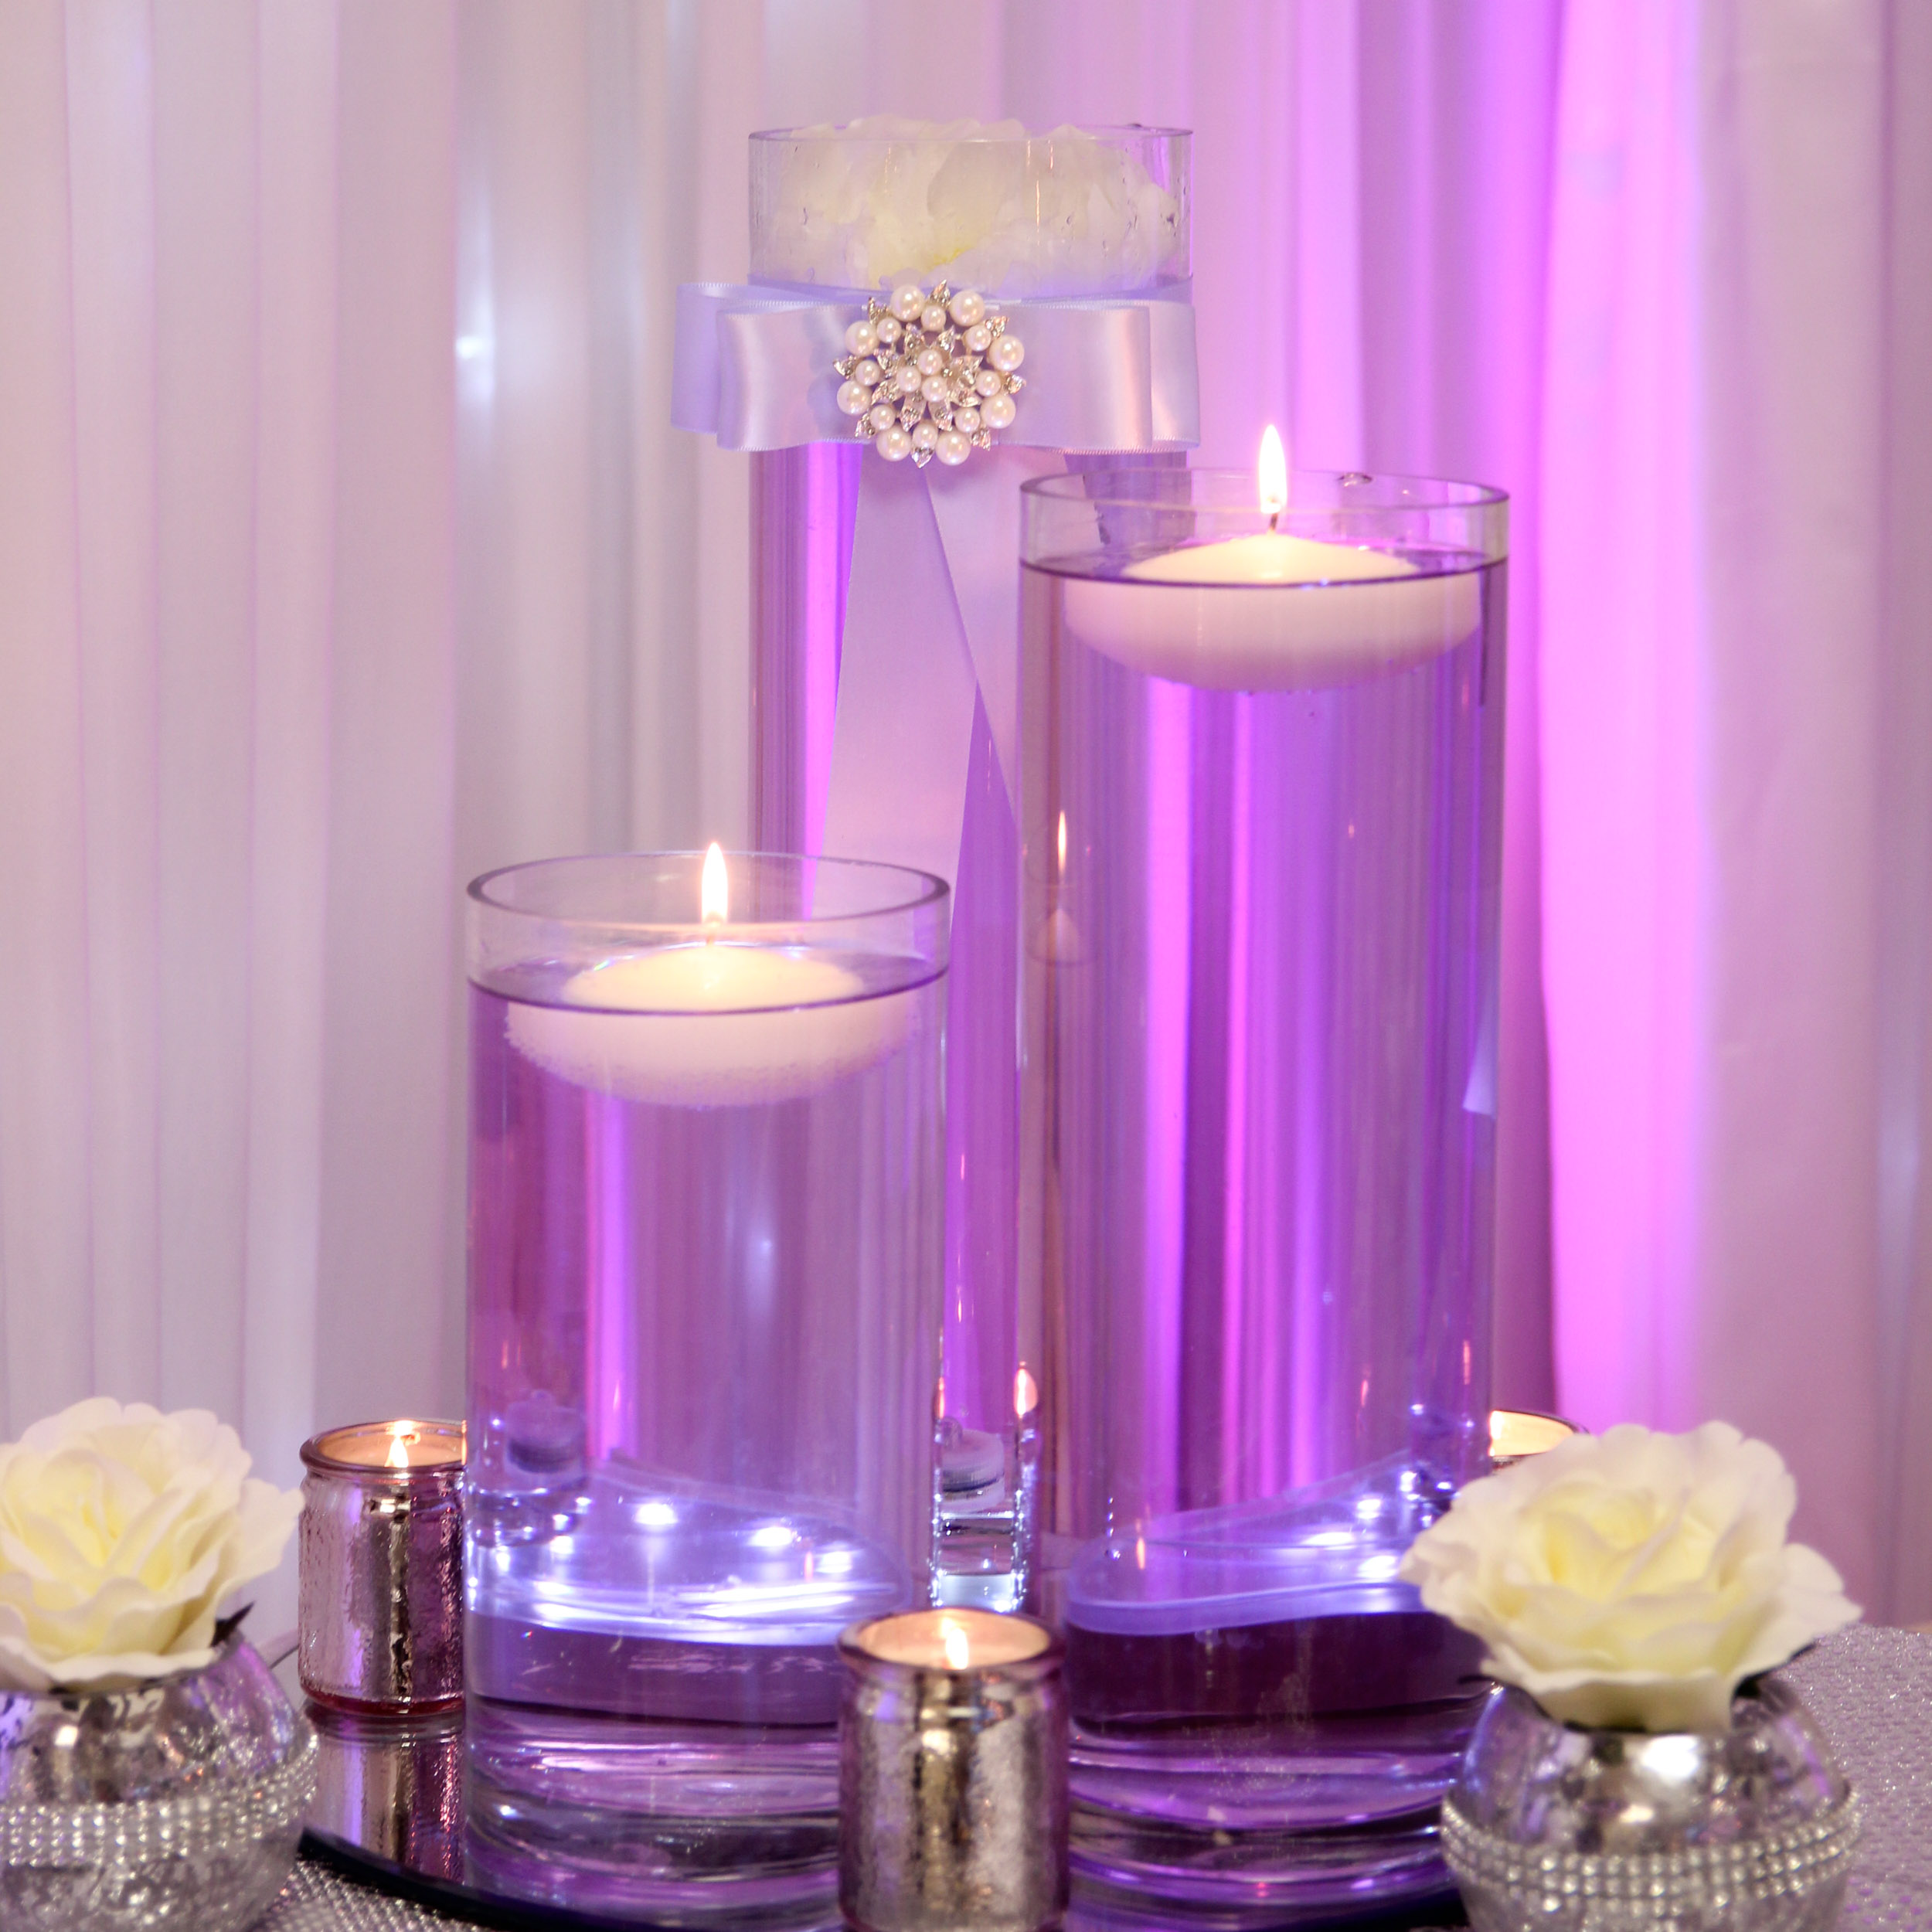 Floating Candles - Beyond Expectations Weddings & Events